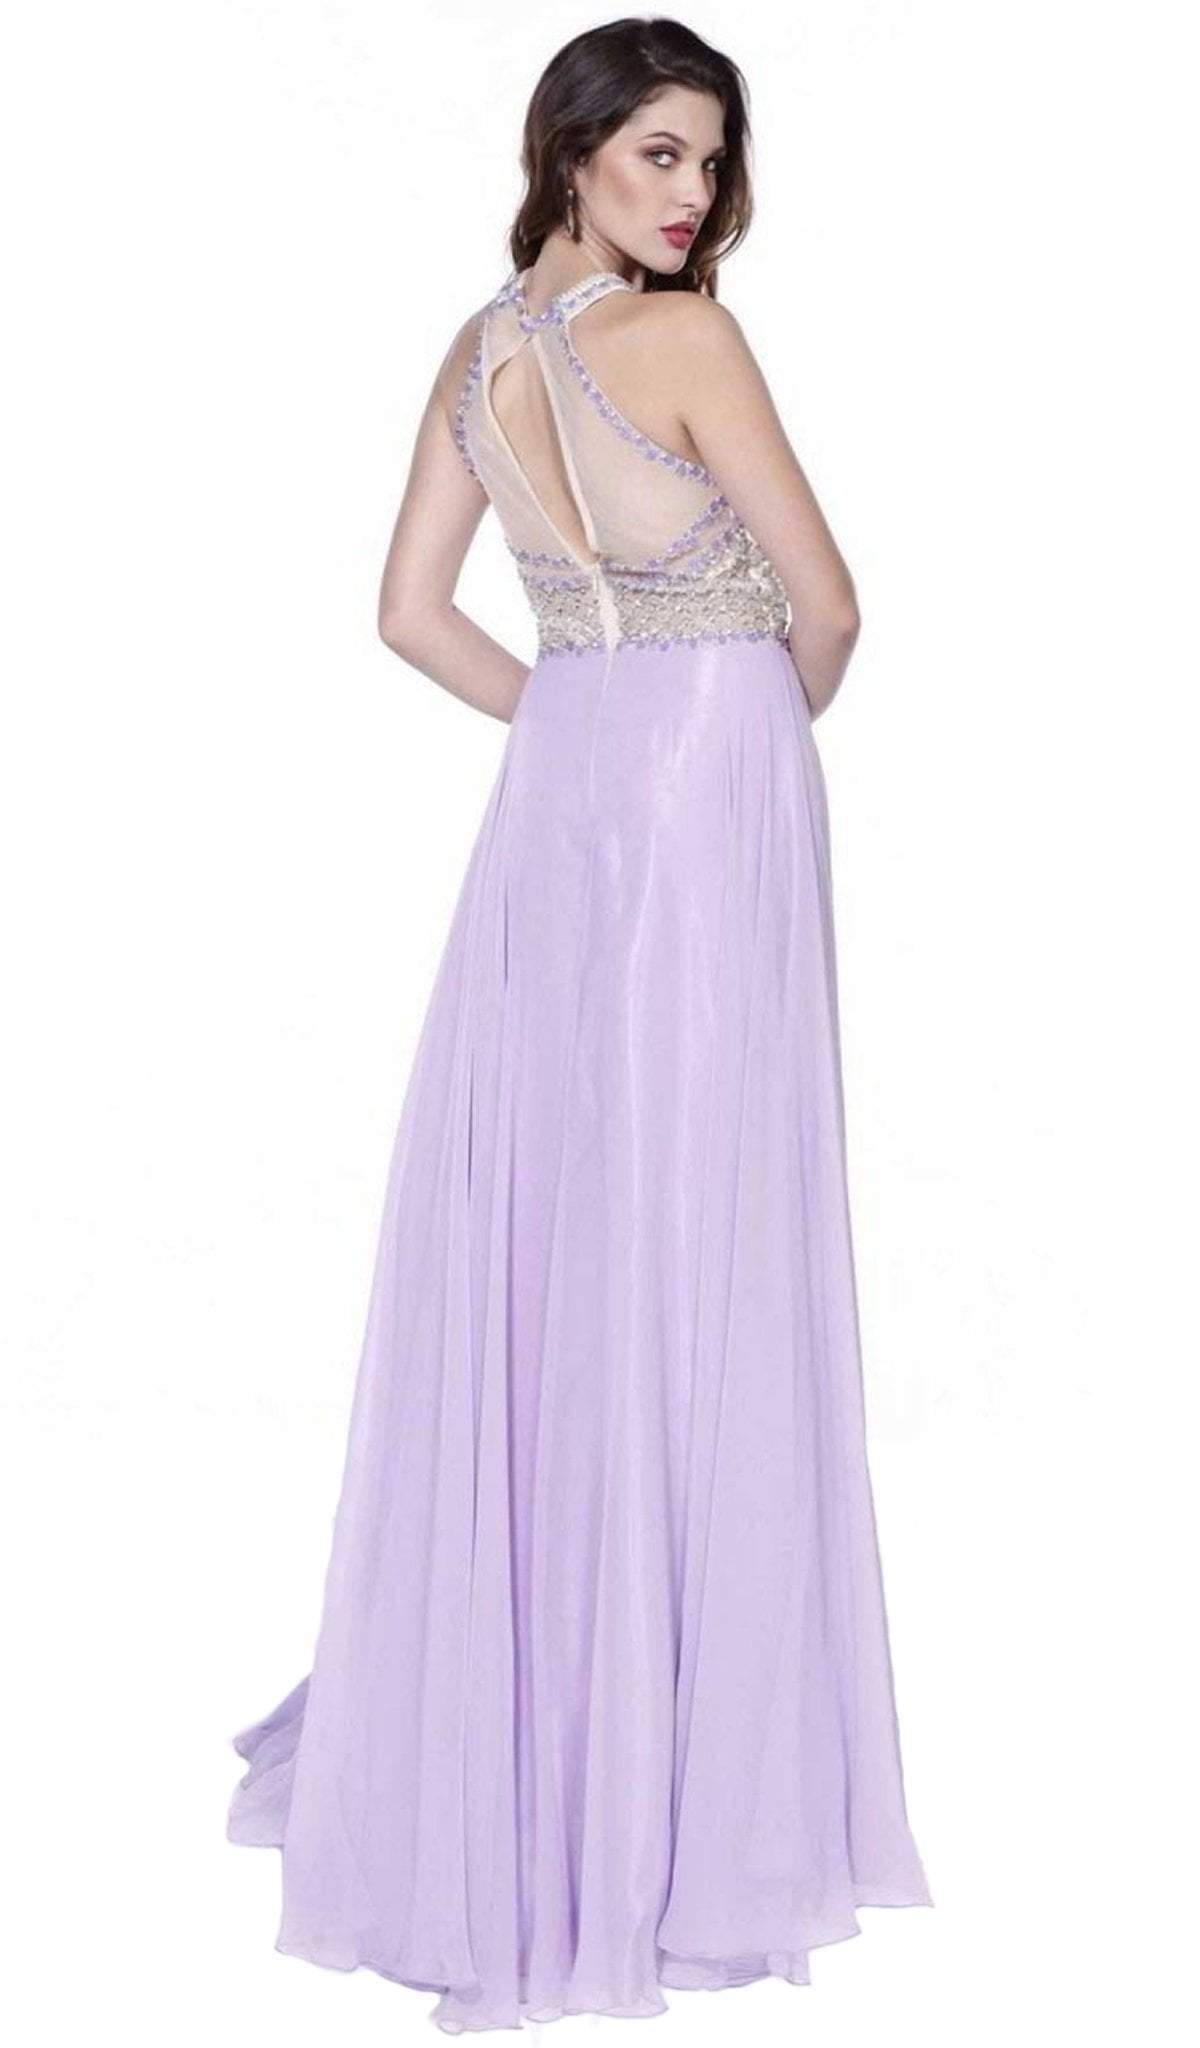 Nox Anabel - 8201 Beaded Sleeveless Halter Long Gown Special Occasion Dress